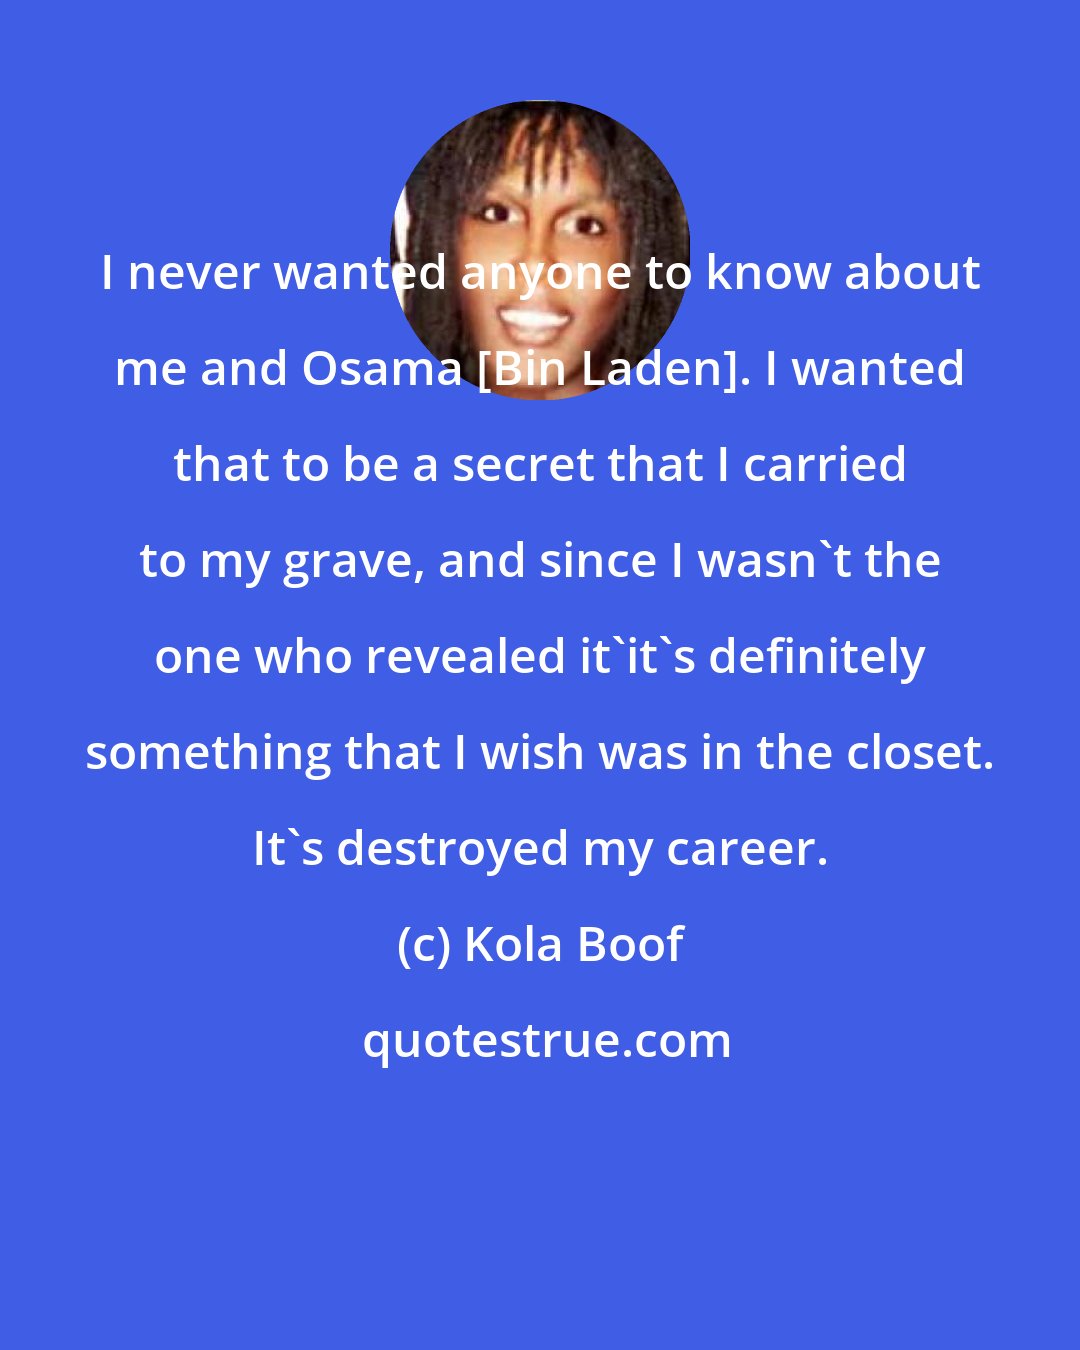 Kola Boof: I never wanted anyone to know about me and Osama [Bin Laden]. I wanted that to be a secret that I carried to my grave, and since I wasn't the one who revealed it'it's definitely something that I wish was in the closet. It's destroyed my career.